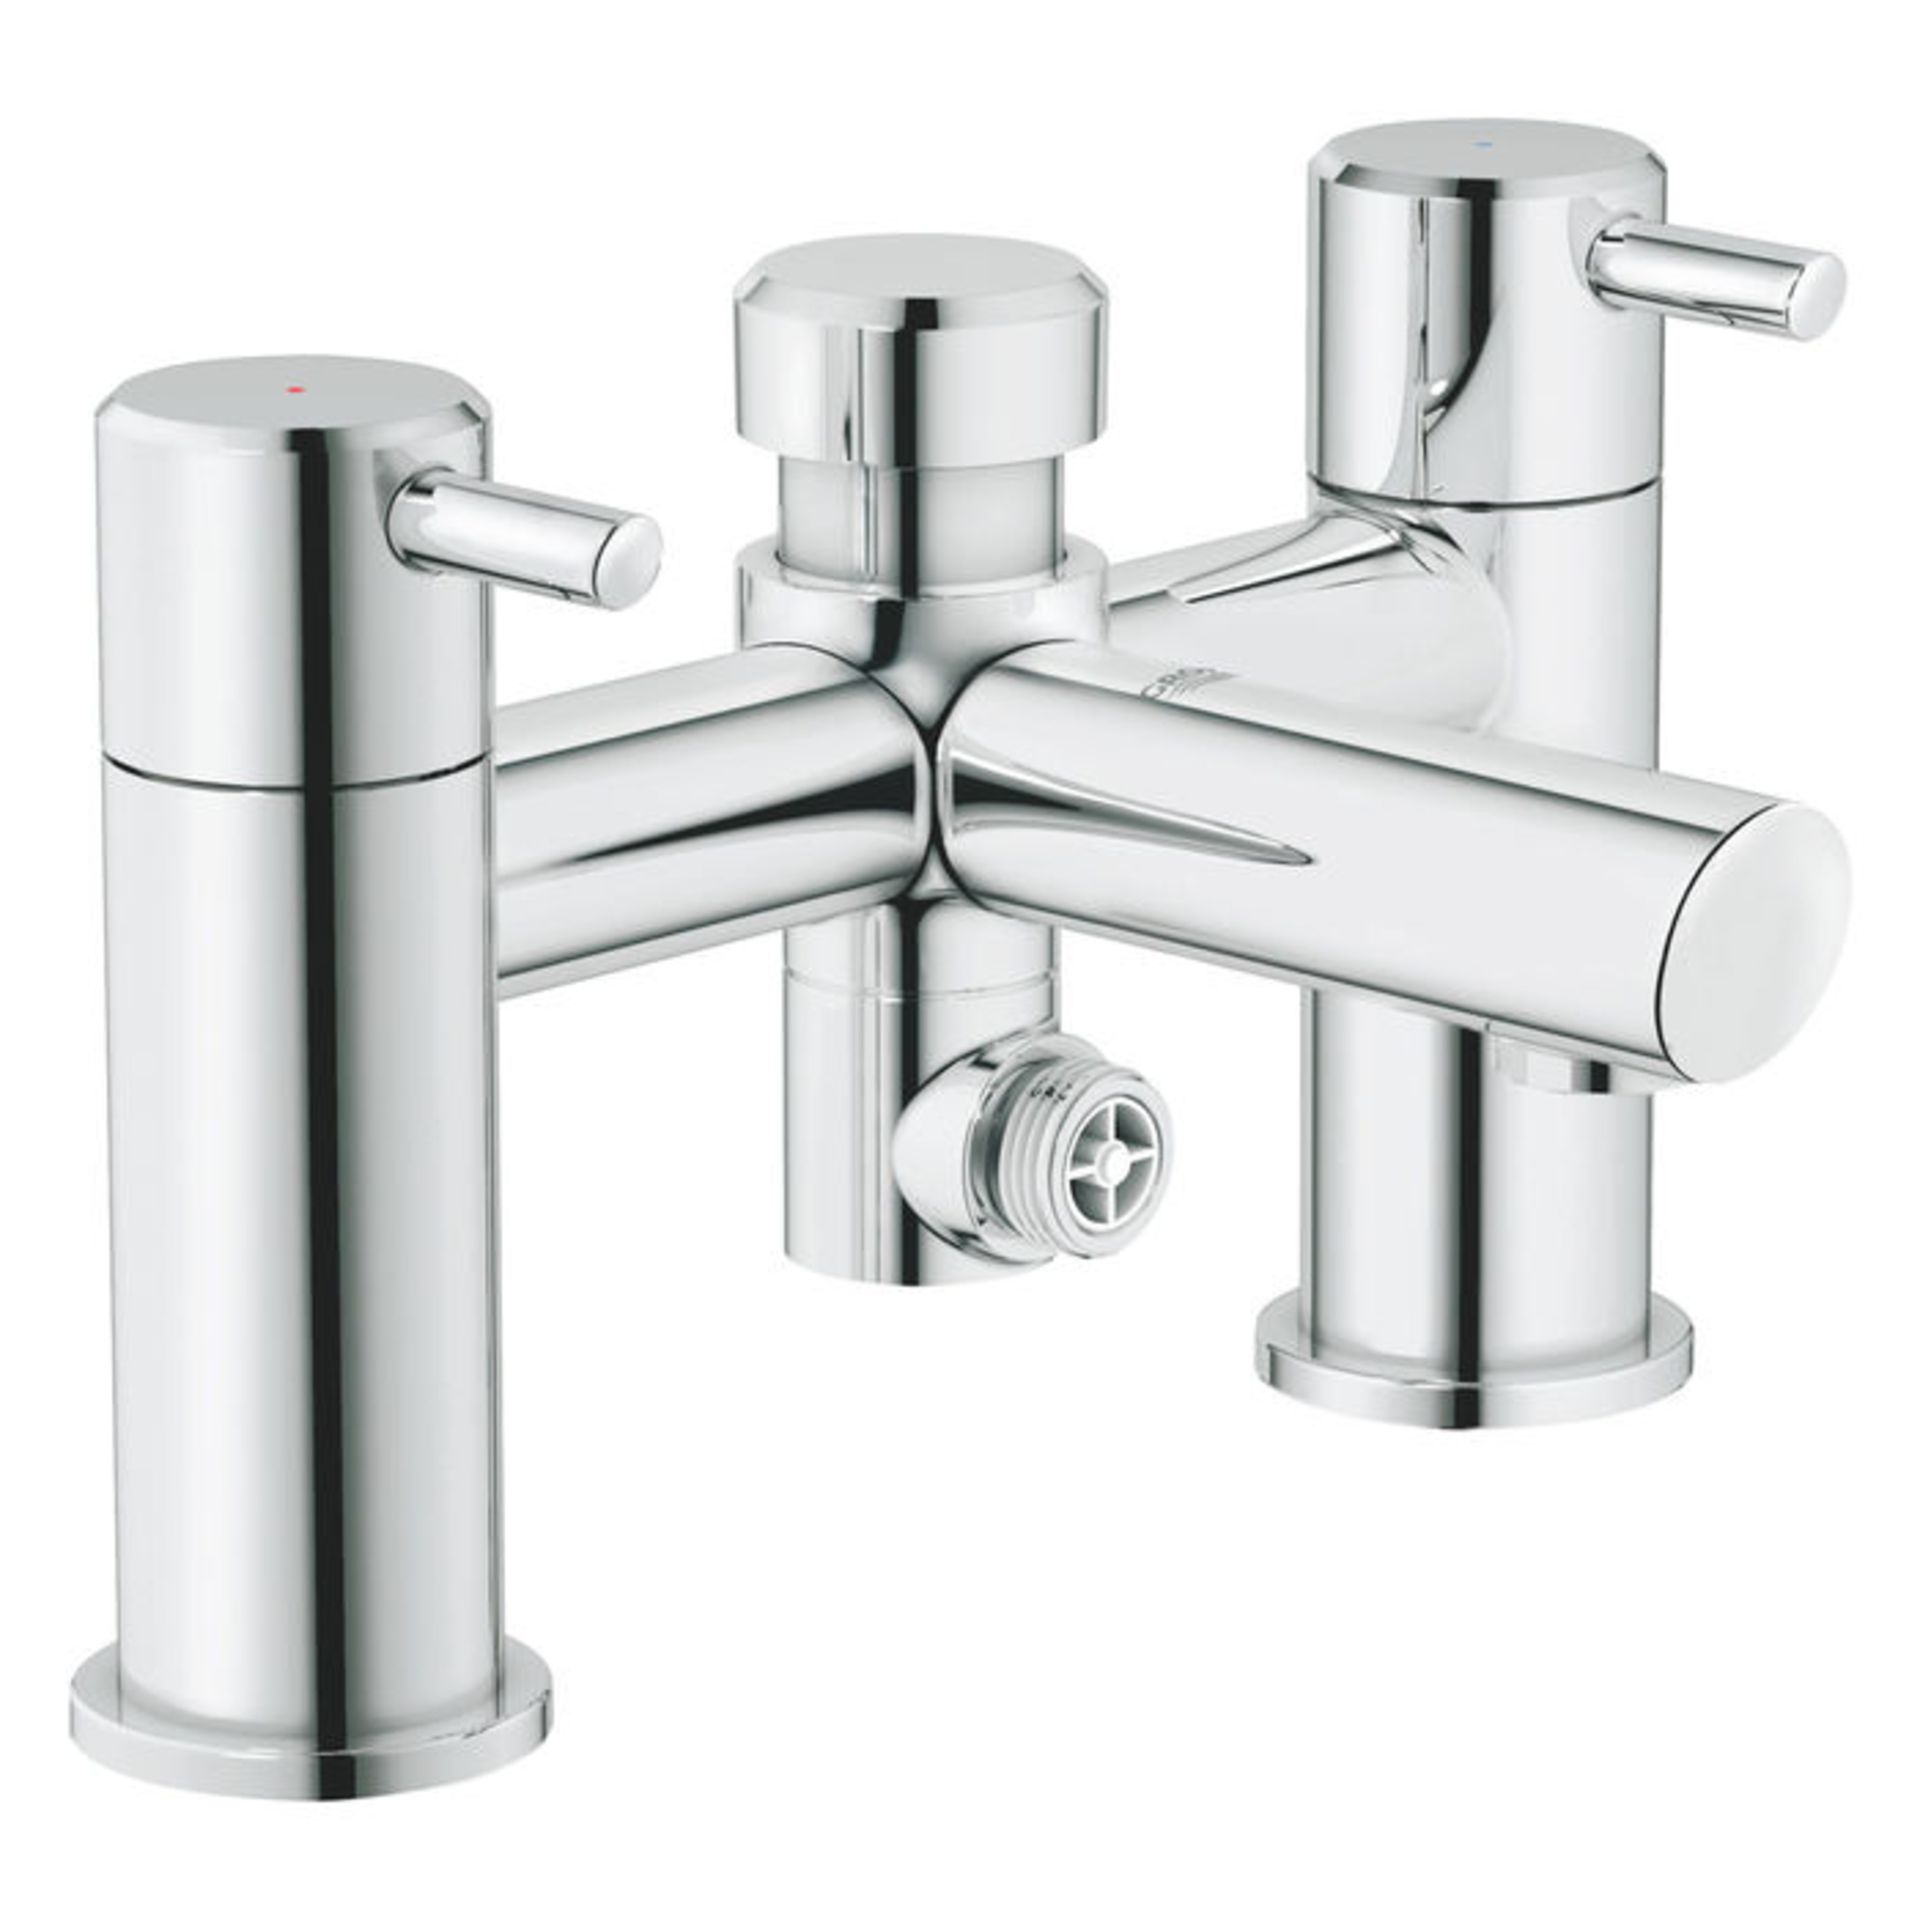 (EW224) Grohe Concetto Bath Shower Mixer Tap. RRP £179.99. Scratch resistant and easy to clean - Image 2 of 2